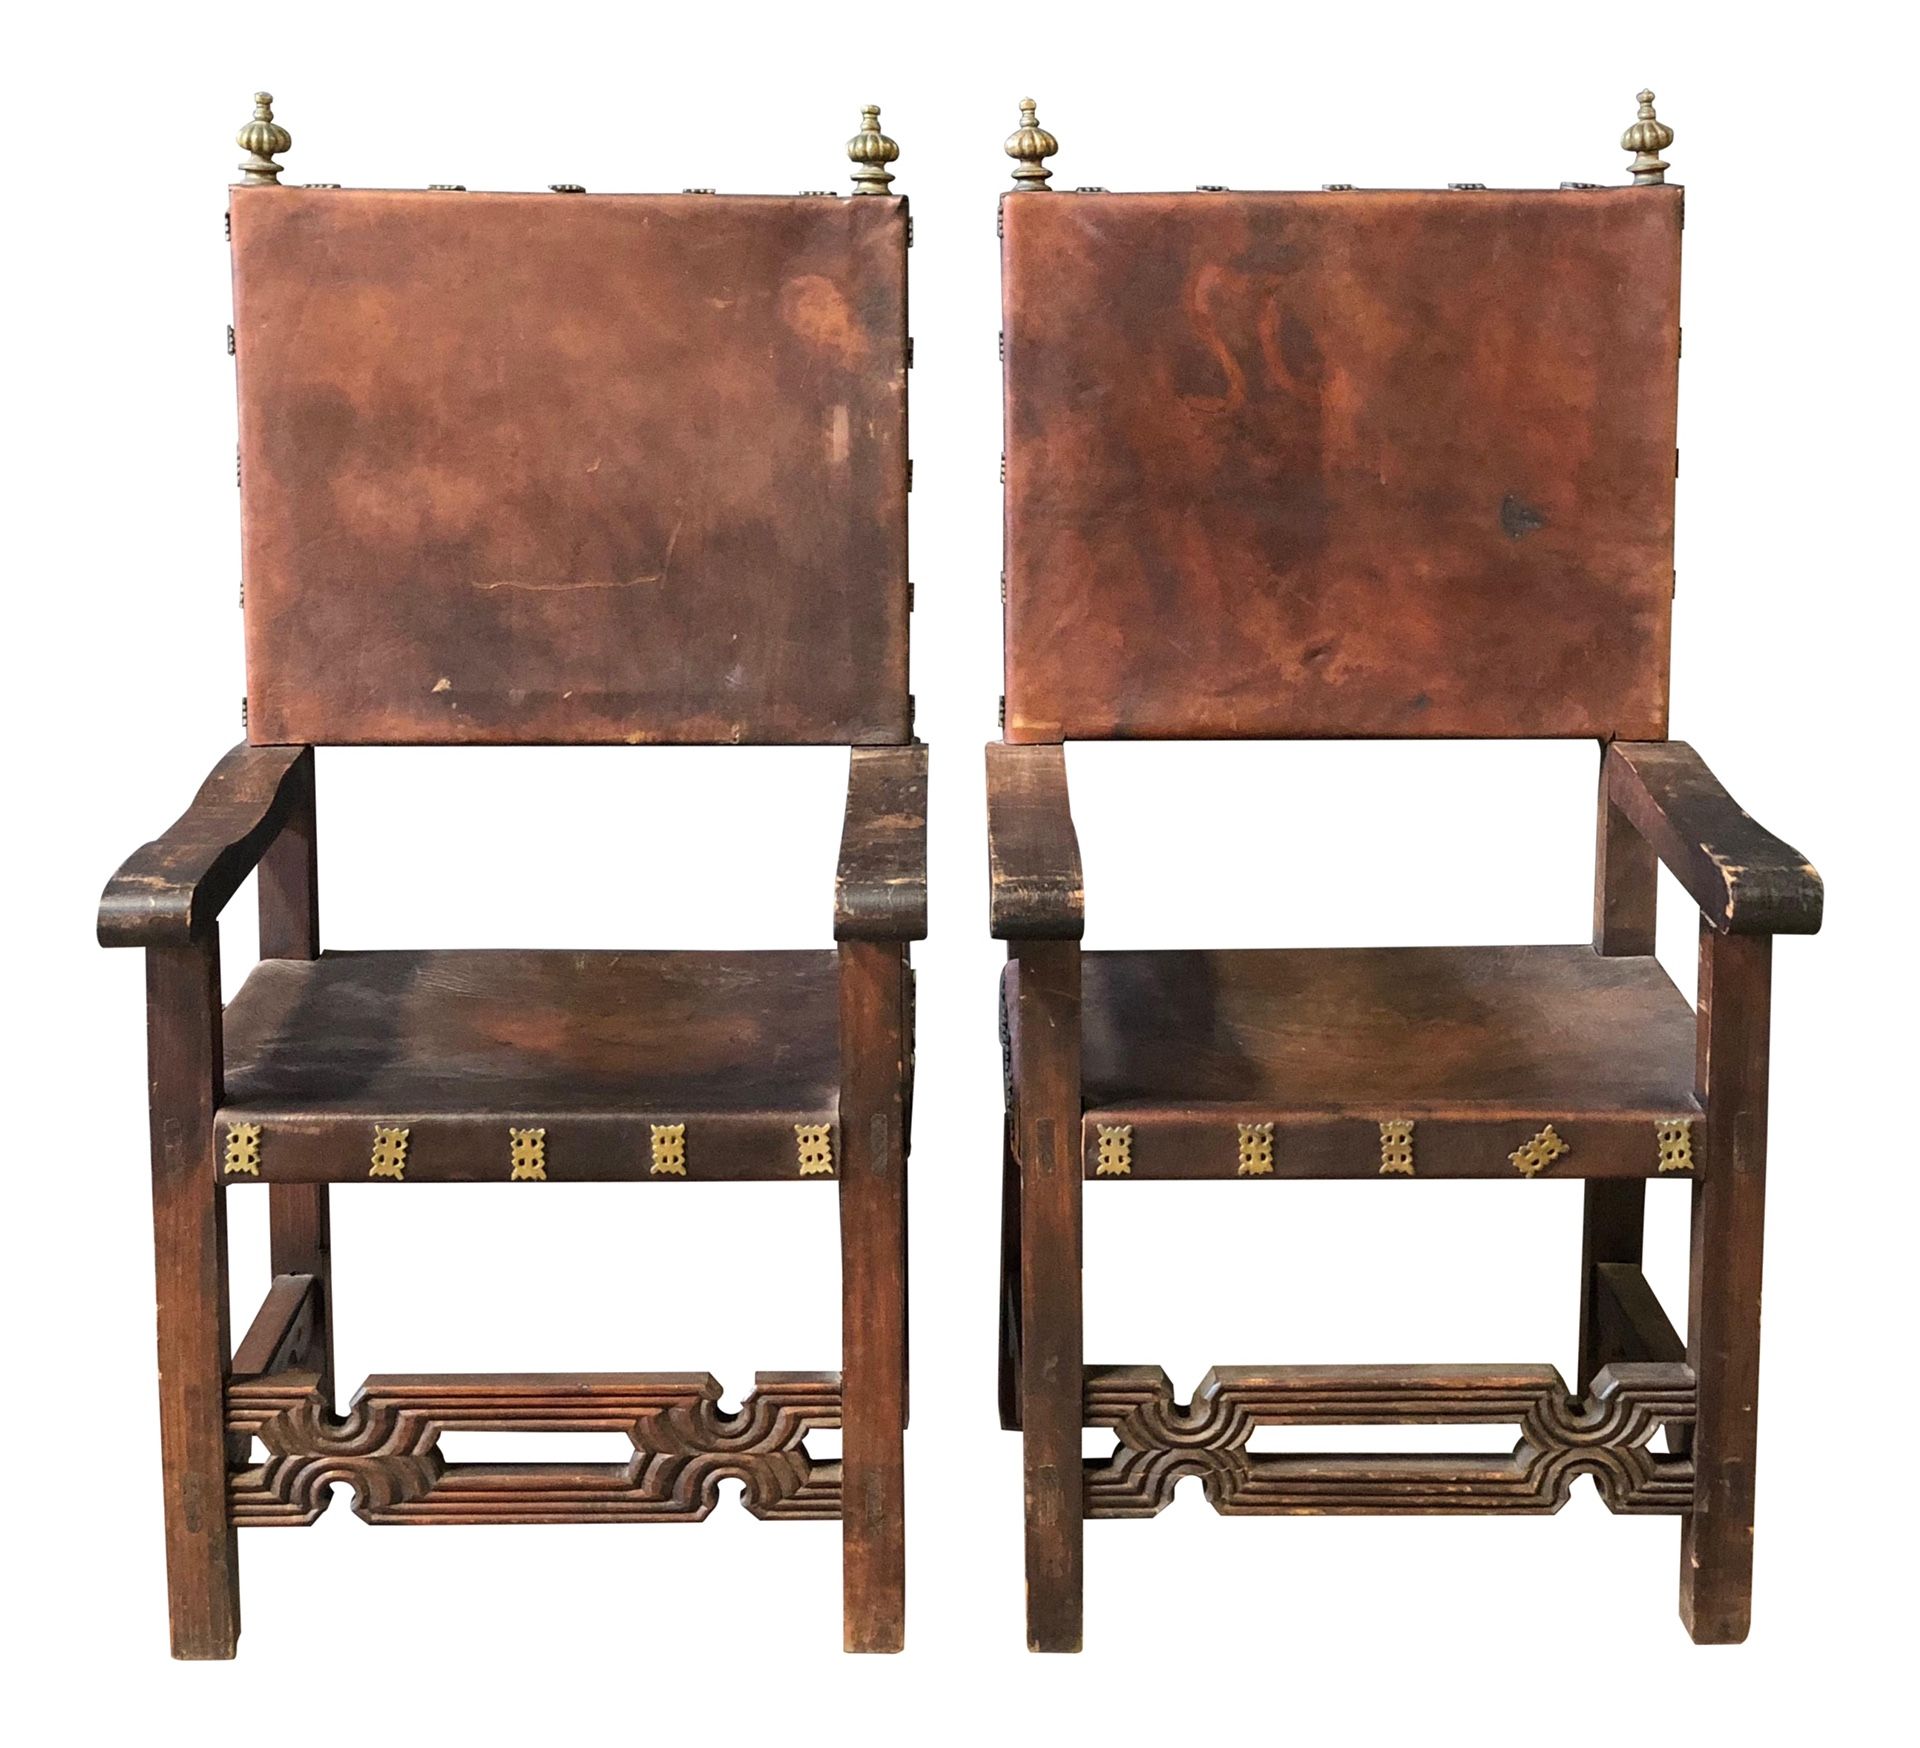 Spanish Antique Walnut Leather circa 1940s dining room chairs - handmade - exquisite set of 4